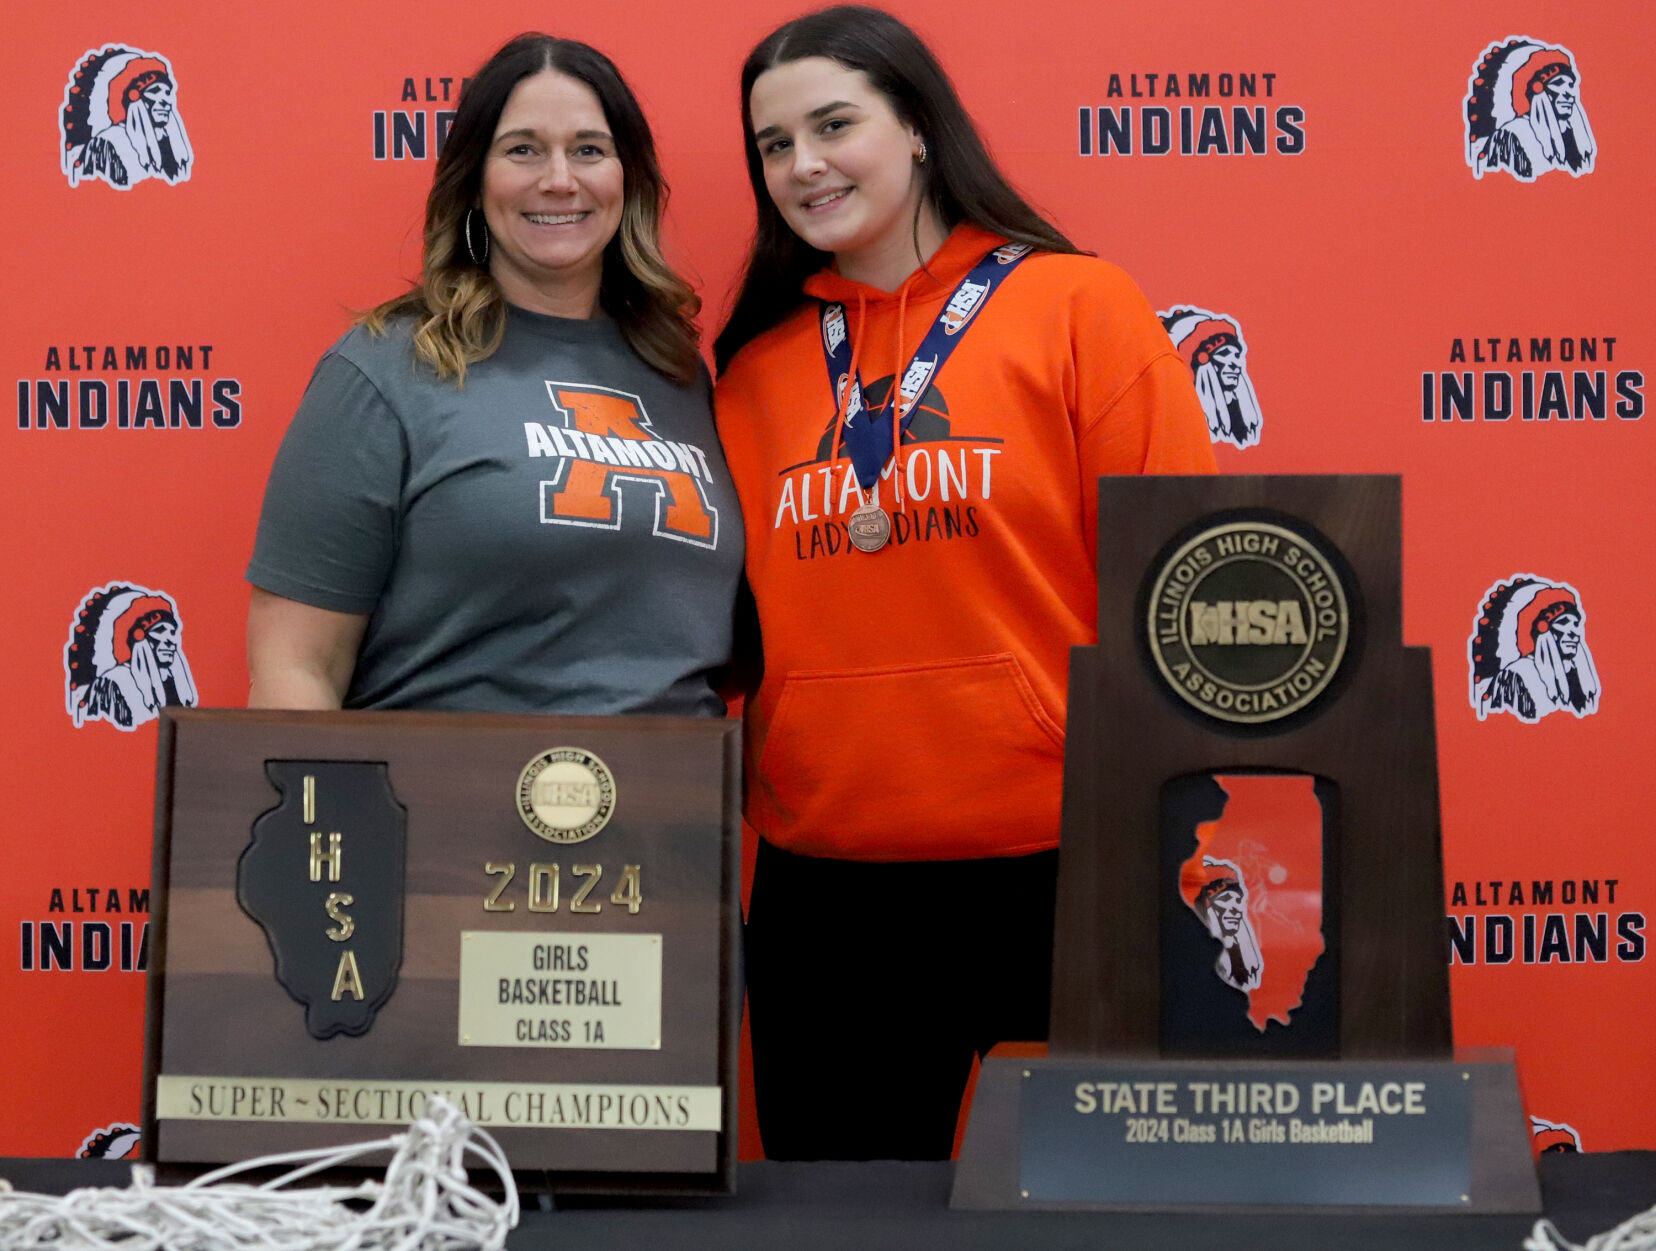 Katie and Kaylee Lurkins: Basketball Bond since Birth with State Tournament Success